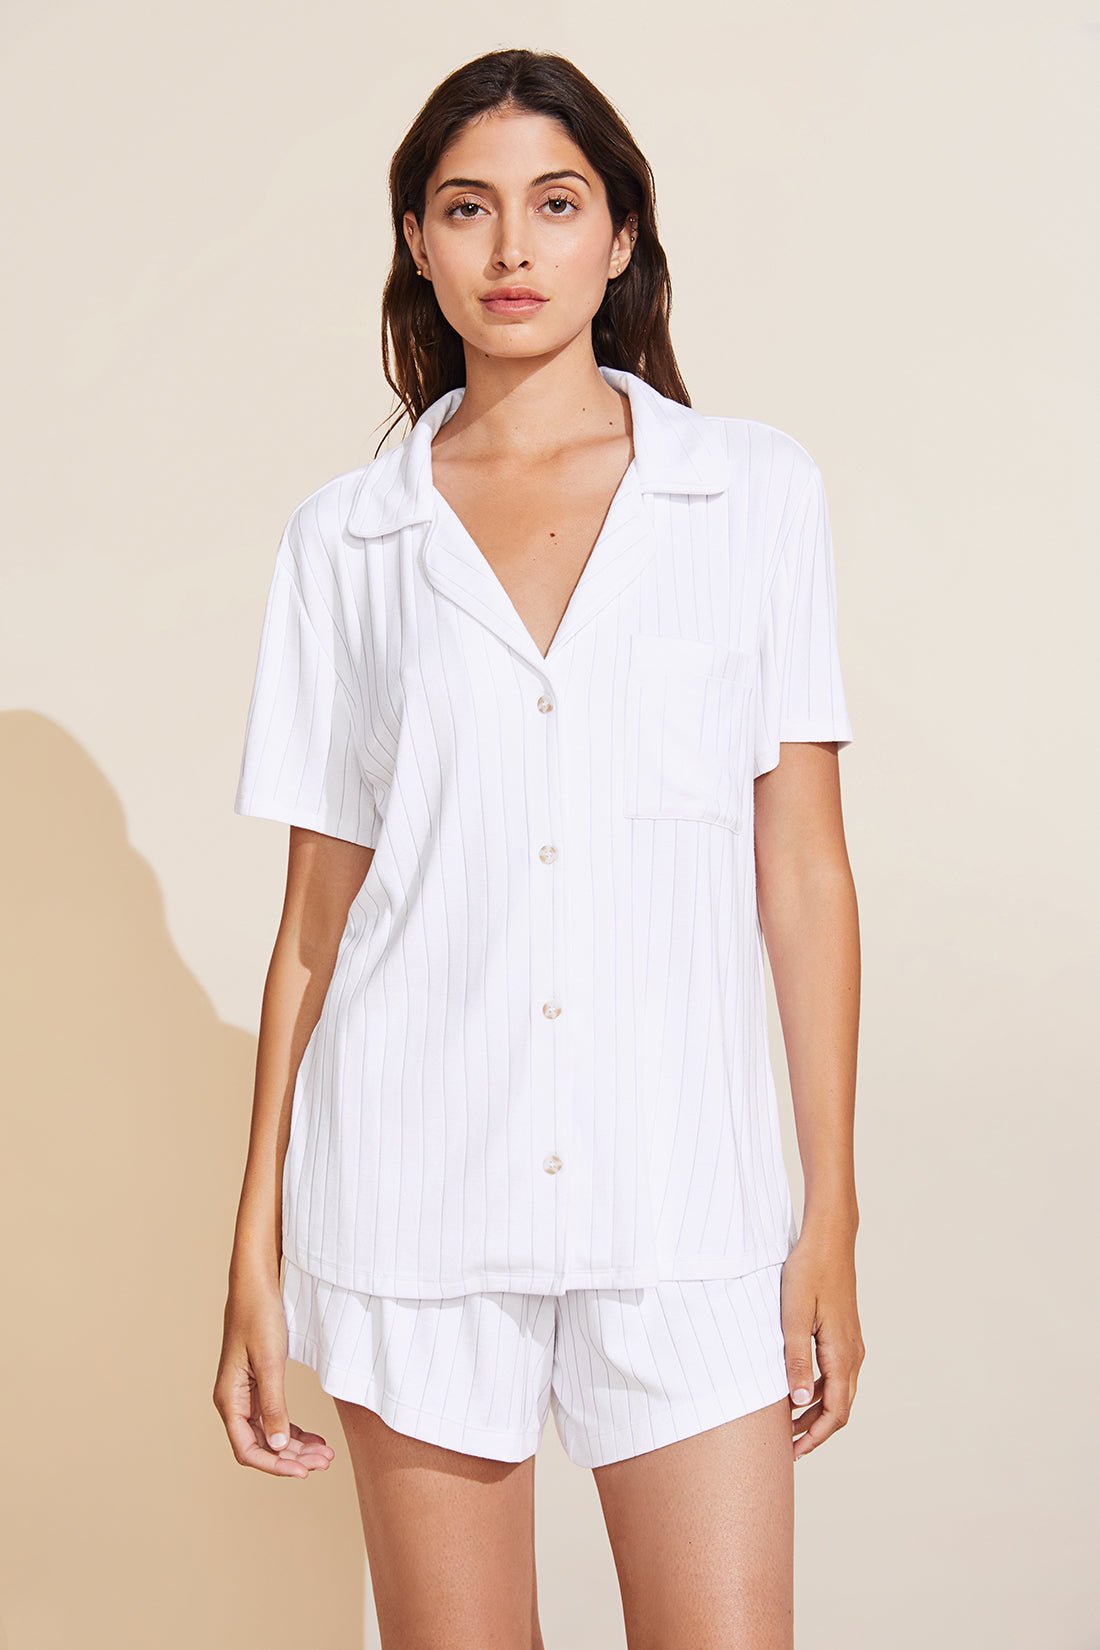 QWEEK Womens Black Edgars Sleepwear Set With Shorts Brief Pajamas For  Couples, Solid Summer Lounging Suit 230321 From Kong02, $16.23